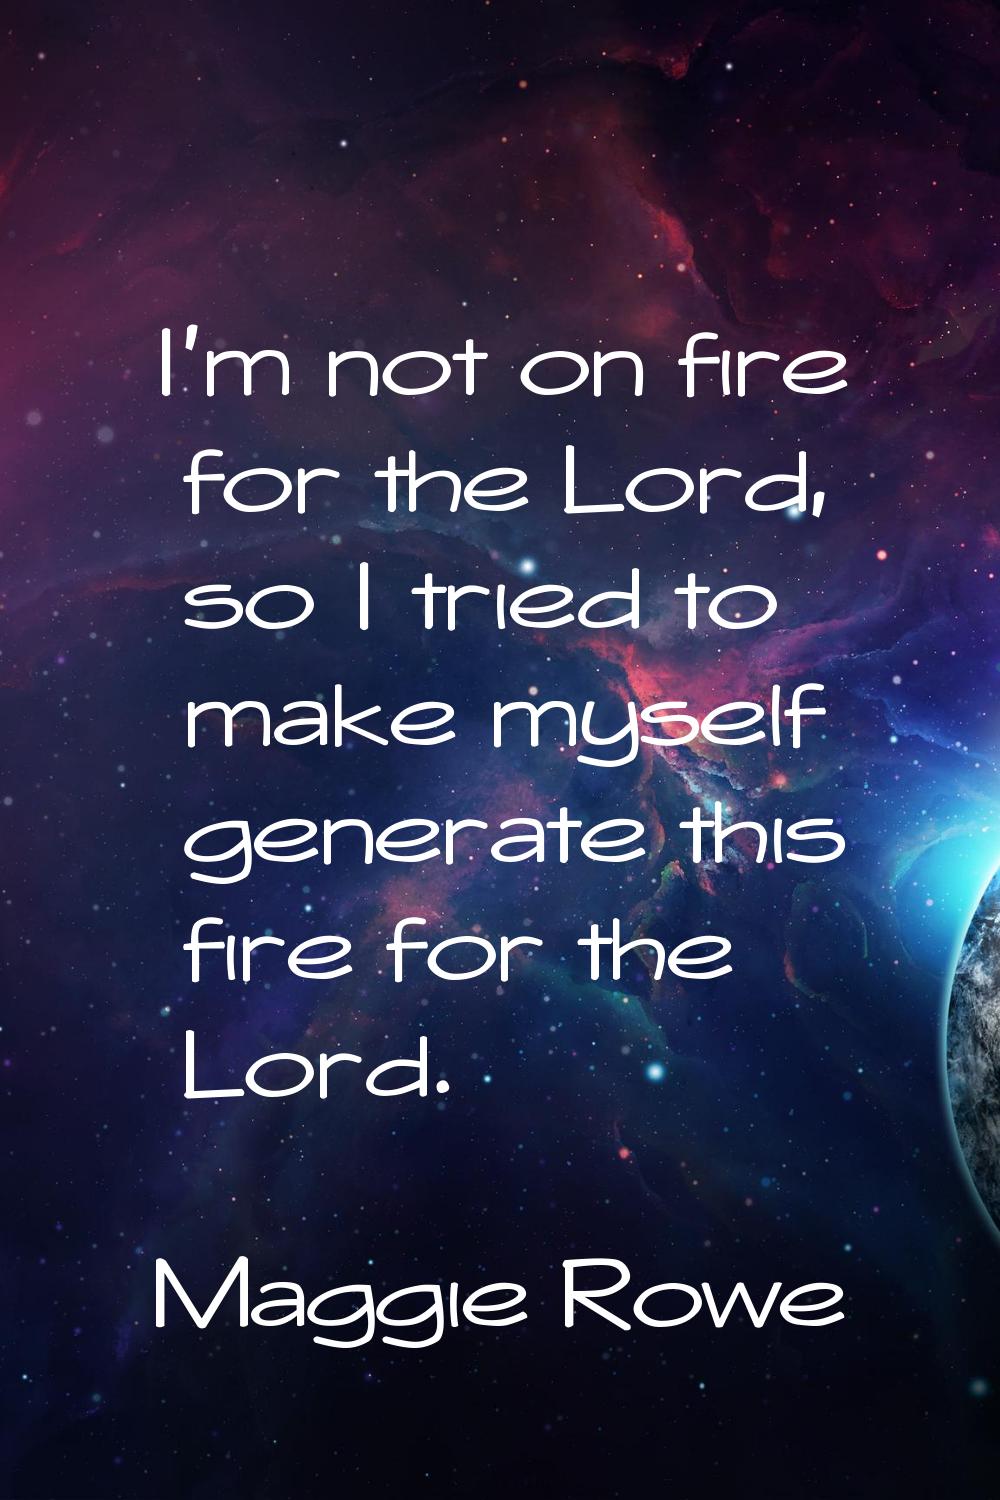 I'm not on fire for the Lord, so I tried to make myself generate this fire for the Lord.